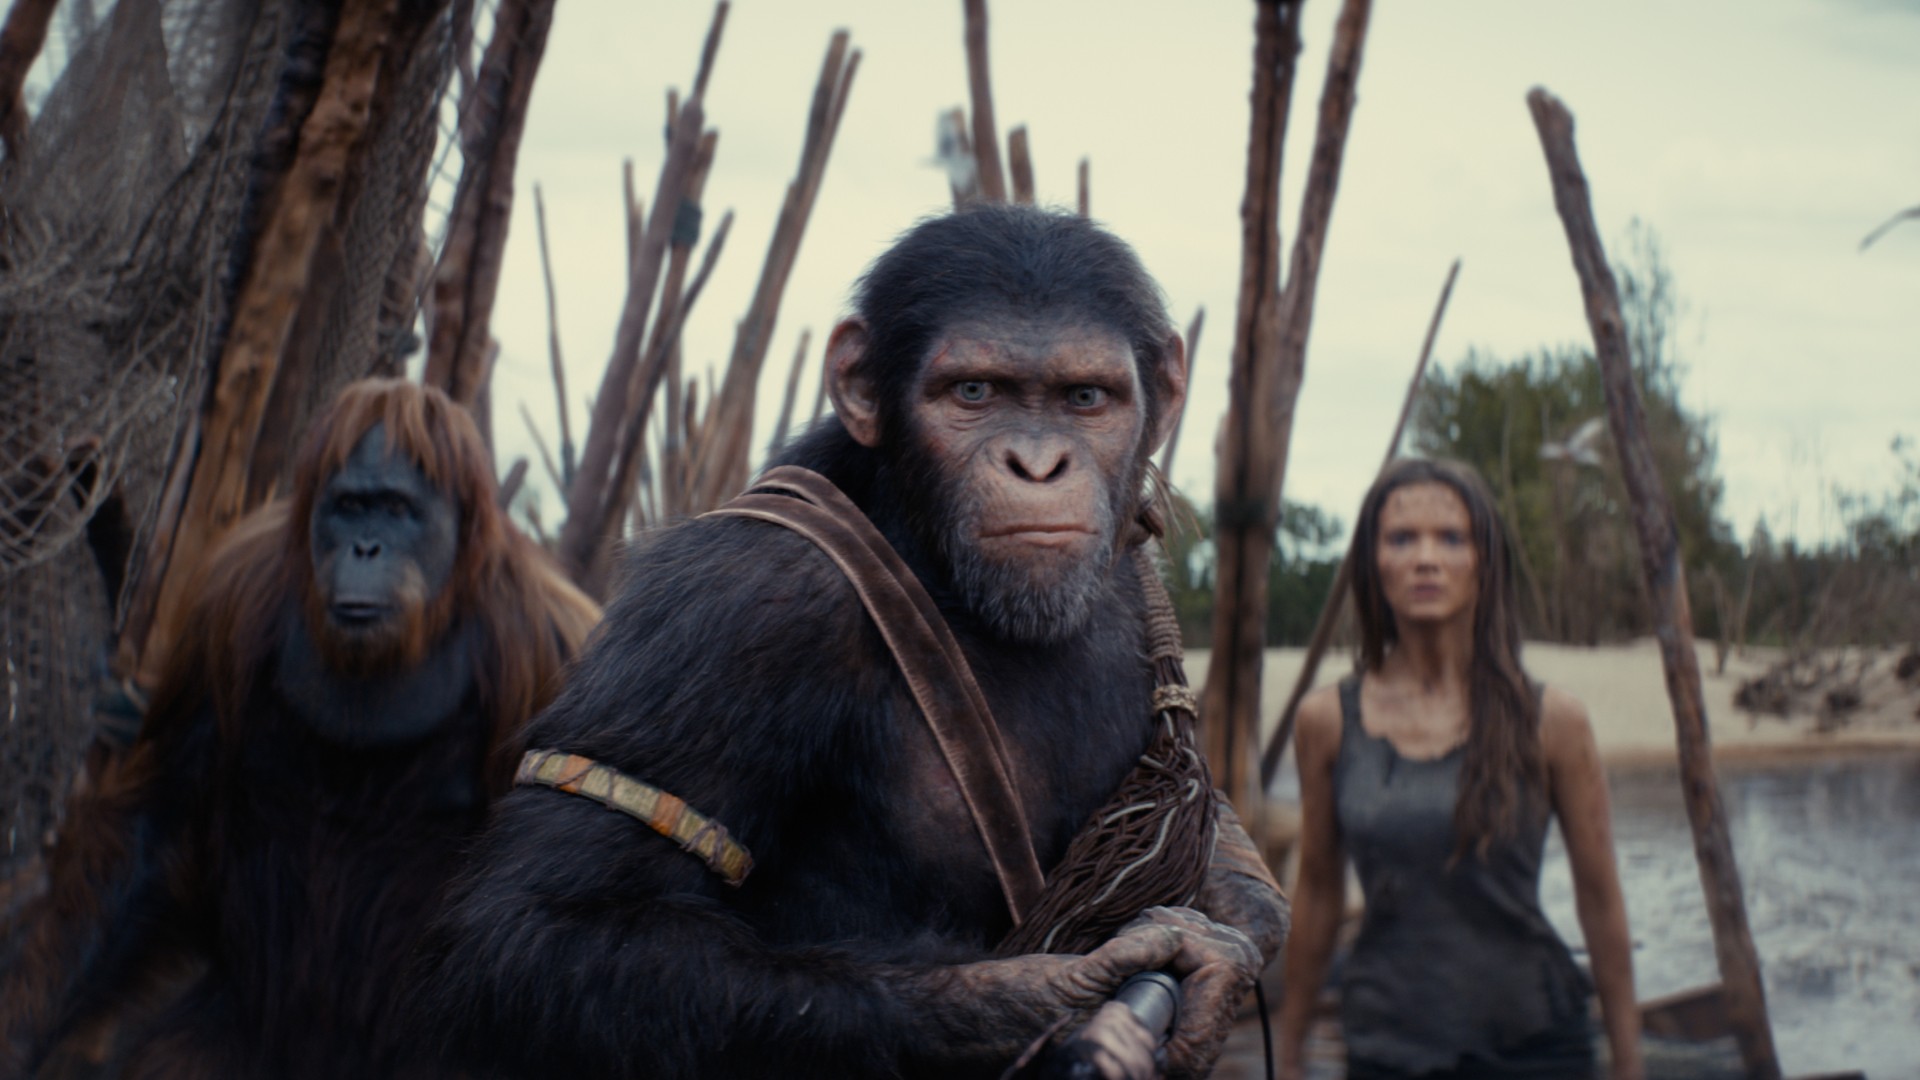 An orangutan, a chimp, and a human brace for battle in a still from Kingdom of the Planet of the Apes.